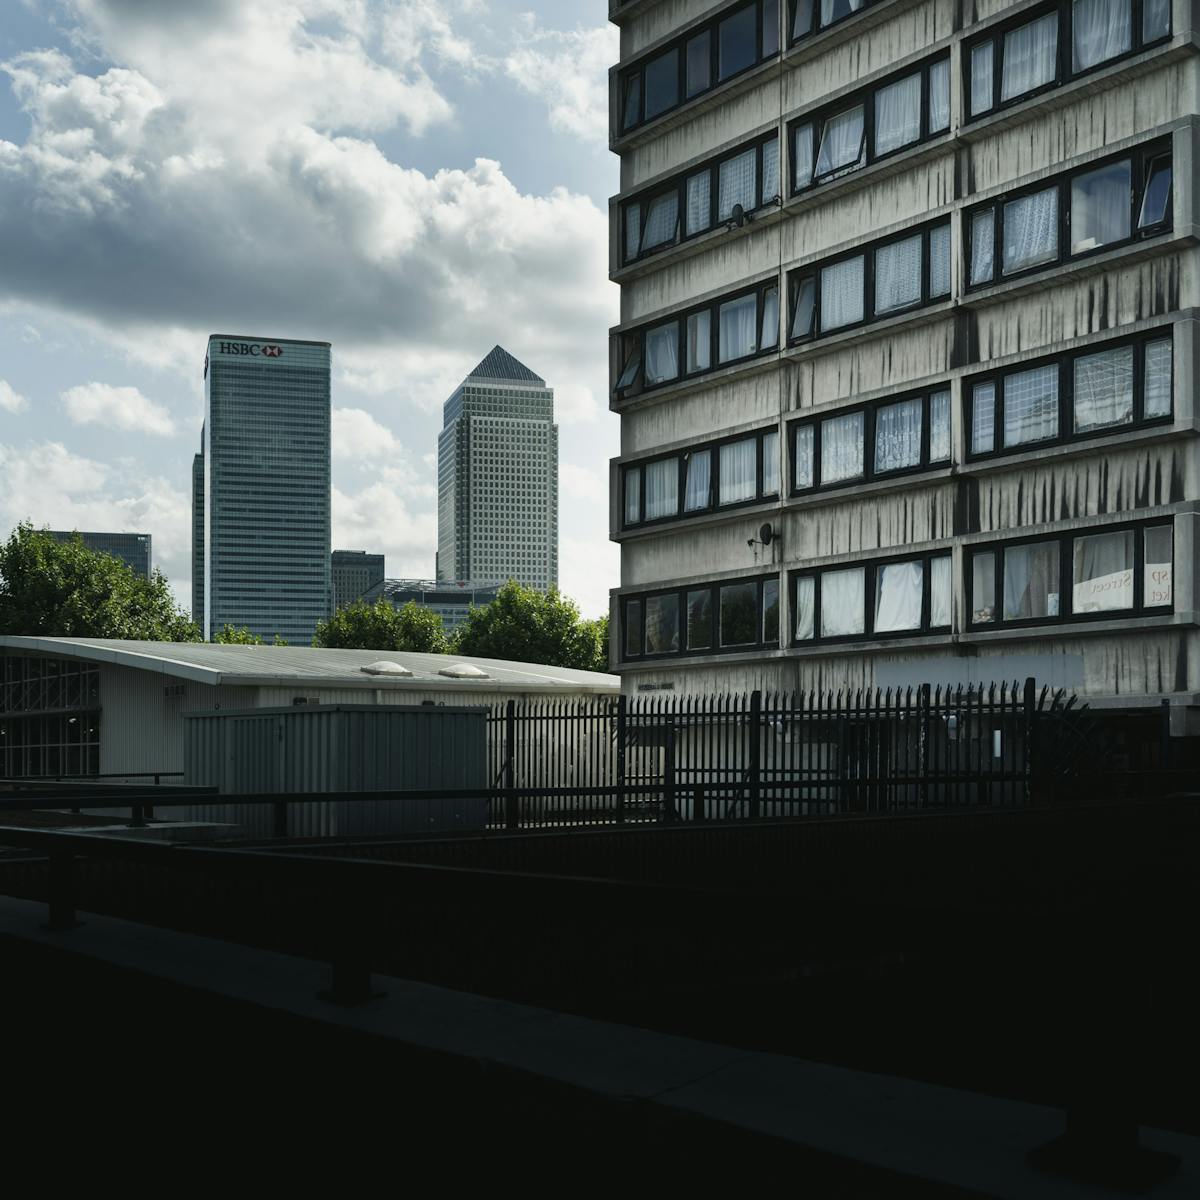 Photograph of a view towards Canary Wharf with a section of a council high rise block of flats in the foreground.